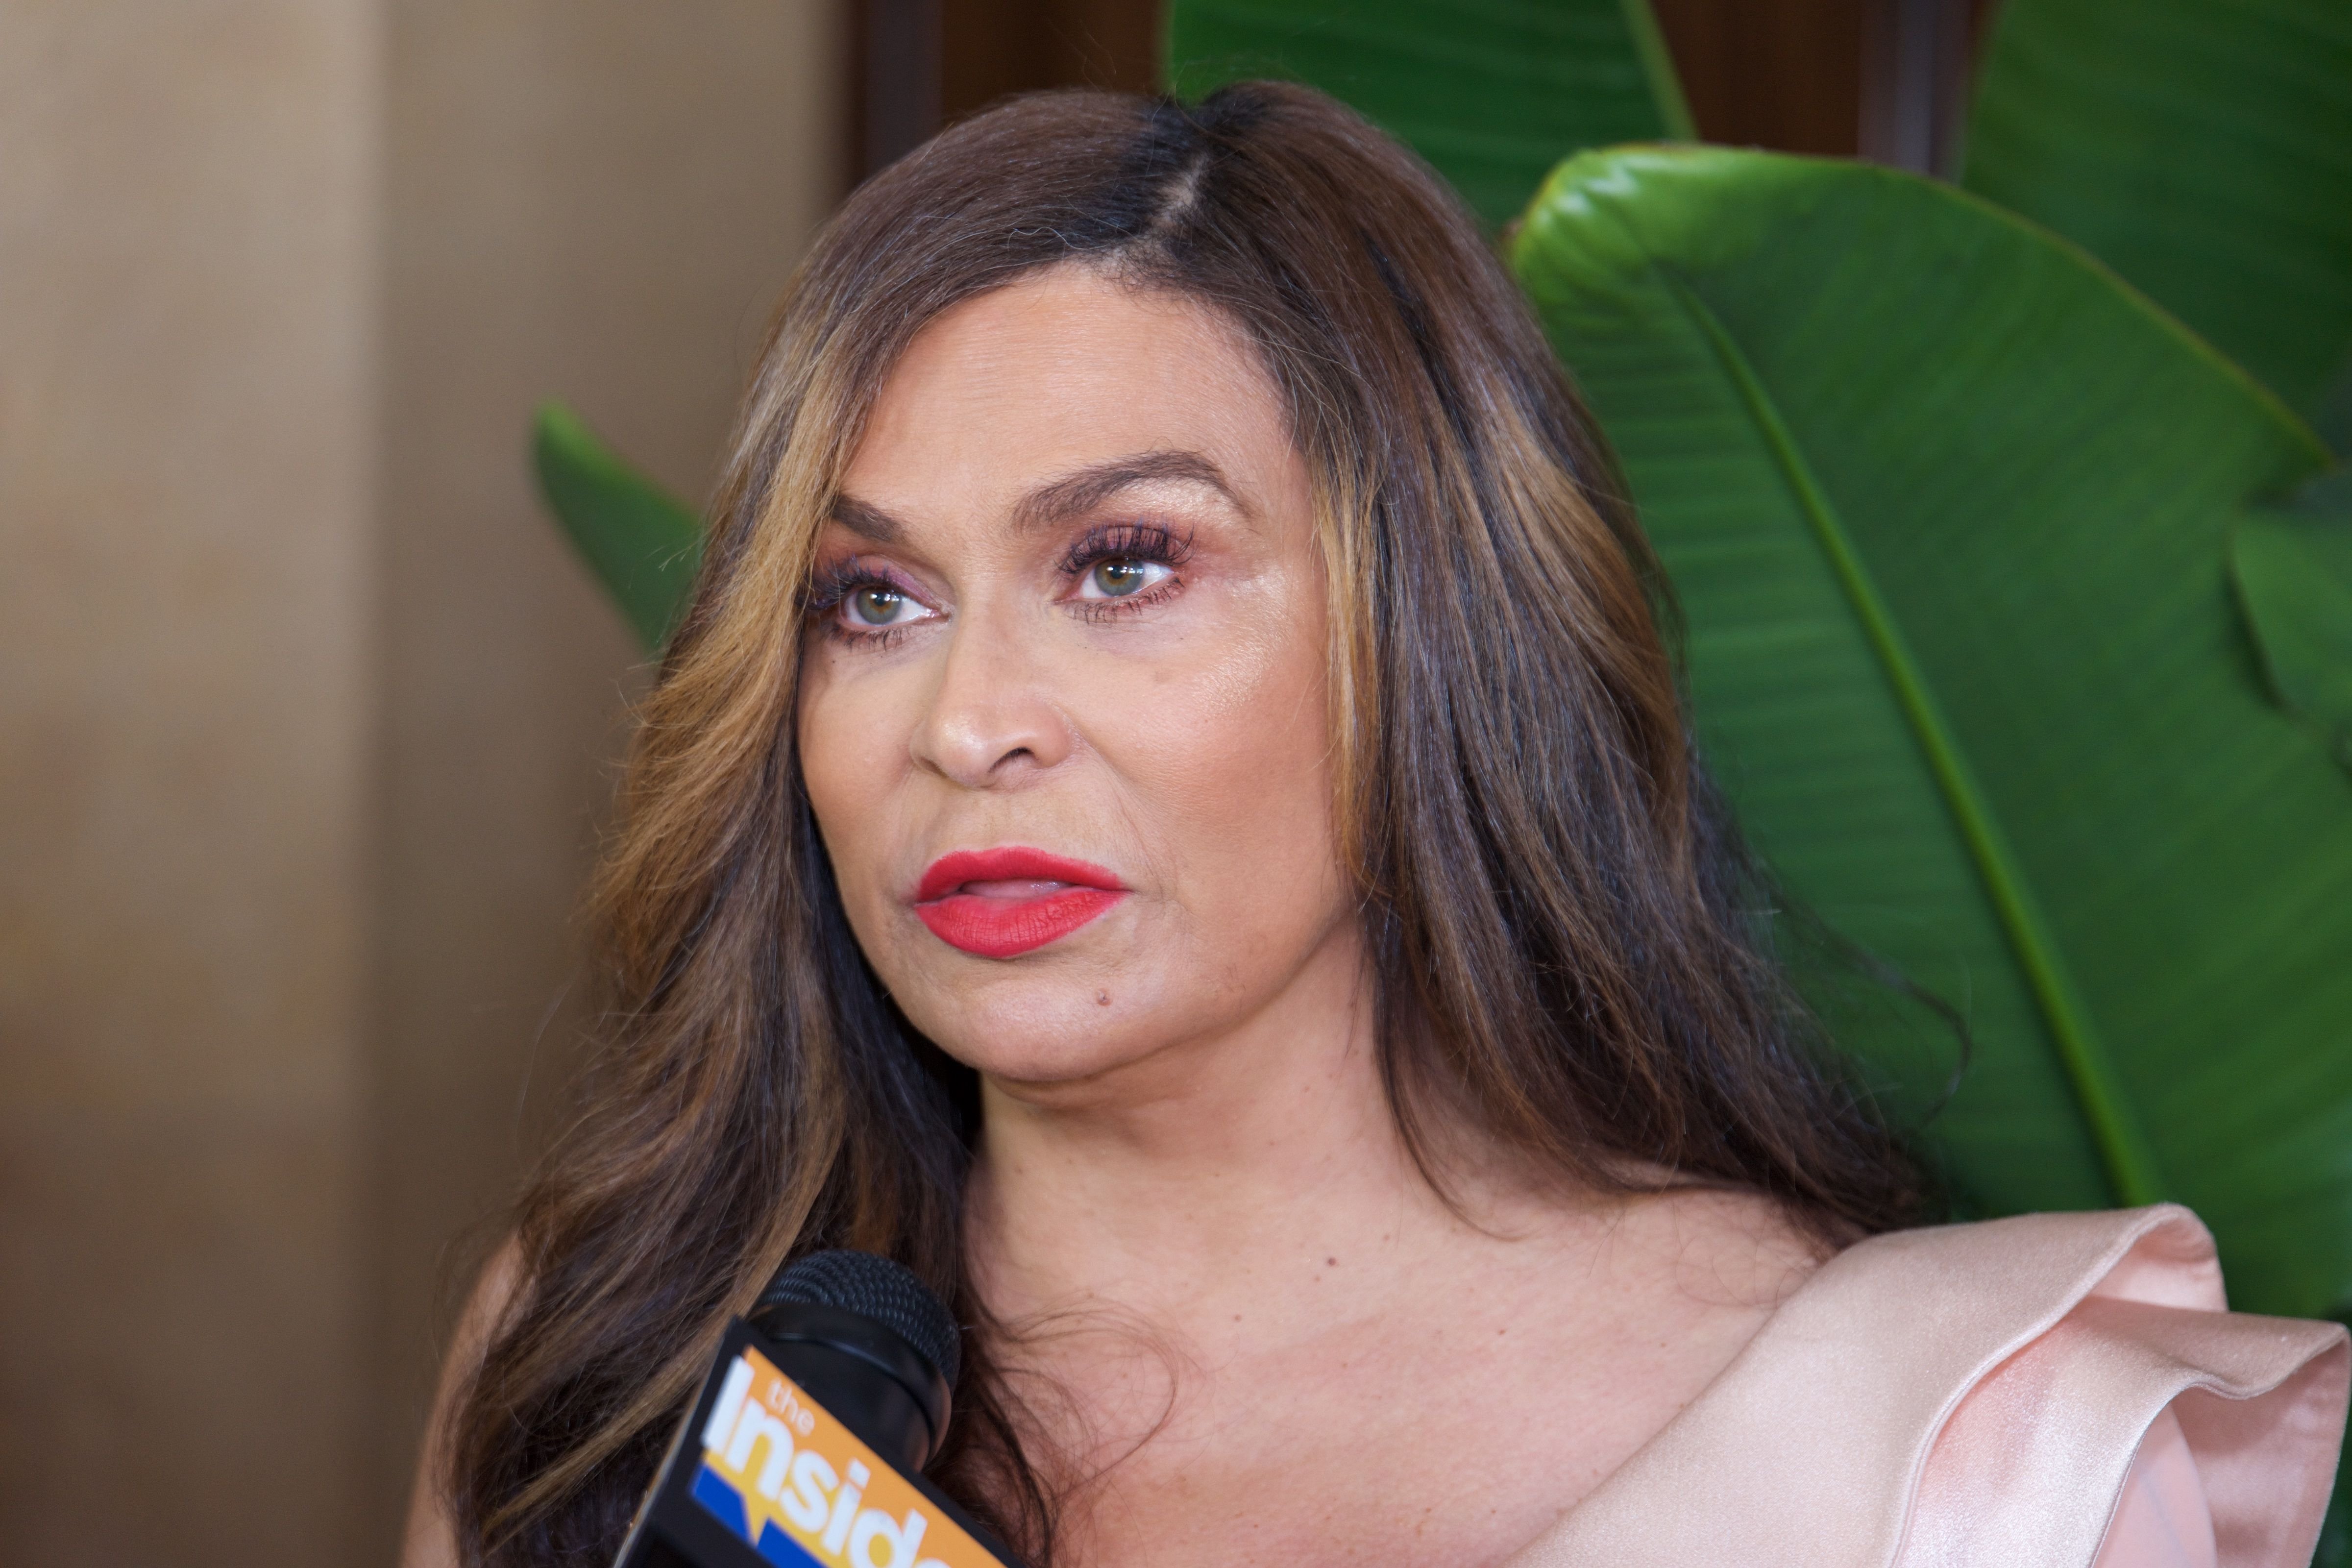 Tina Knowles attends the Ladylike Foundation's 9th Annual Women Of Excellence at The Beverly Hilton Hotel on June 3, 2017 in Beverly Hills, California. | Source: Getty Images